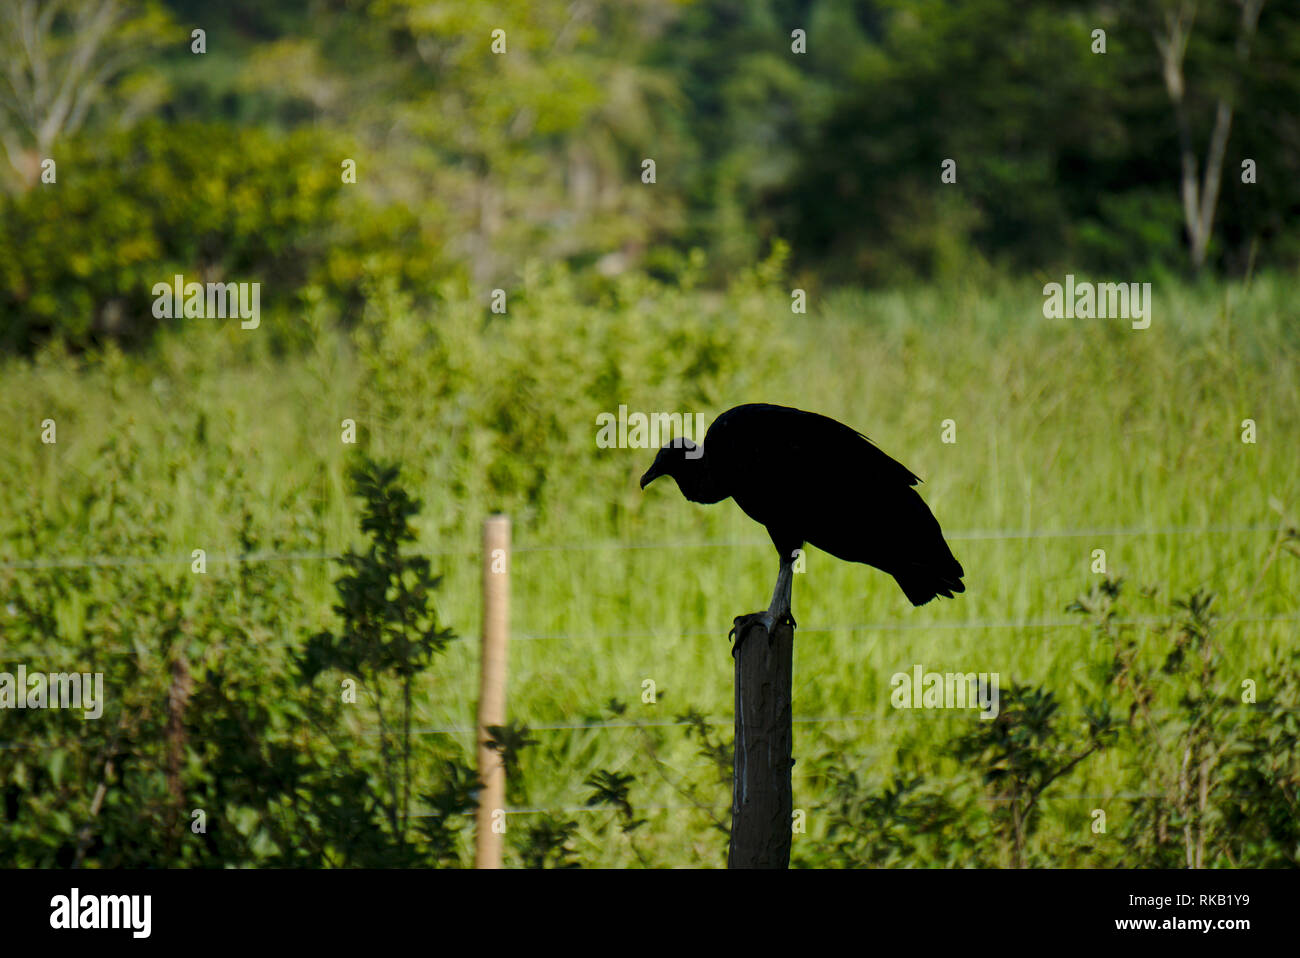 The silhouette of a vulture on a farm. Stock Photo